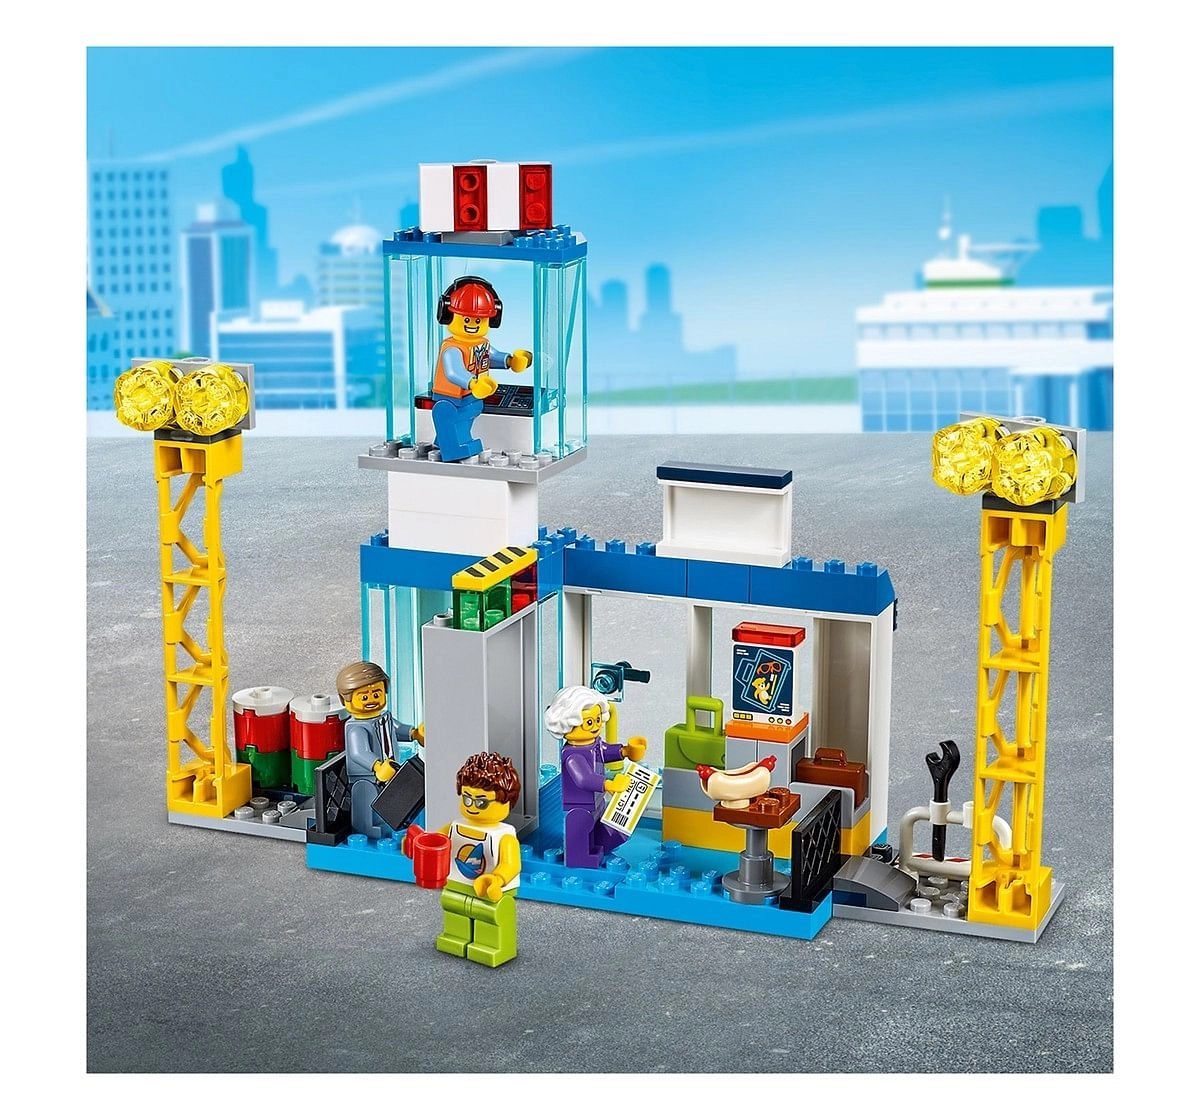 LEGO 60261 Central Airport Lego Blocks for Kids age 4Y+ 